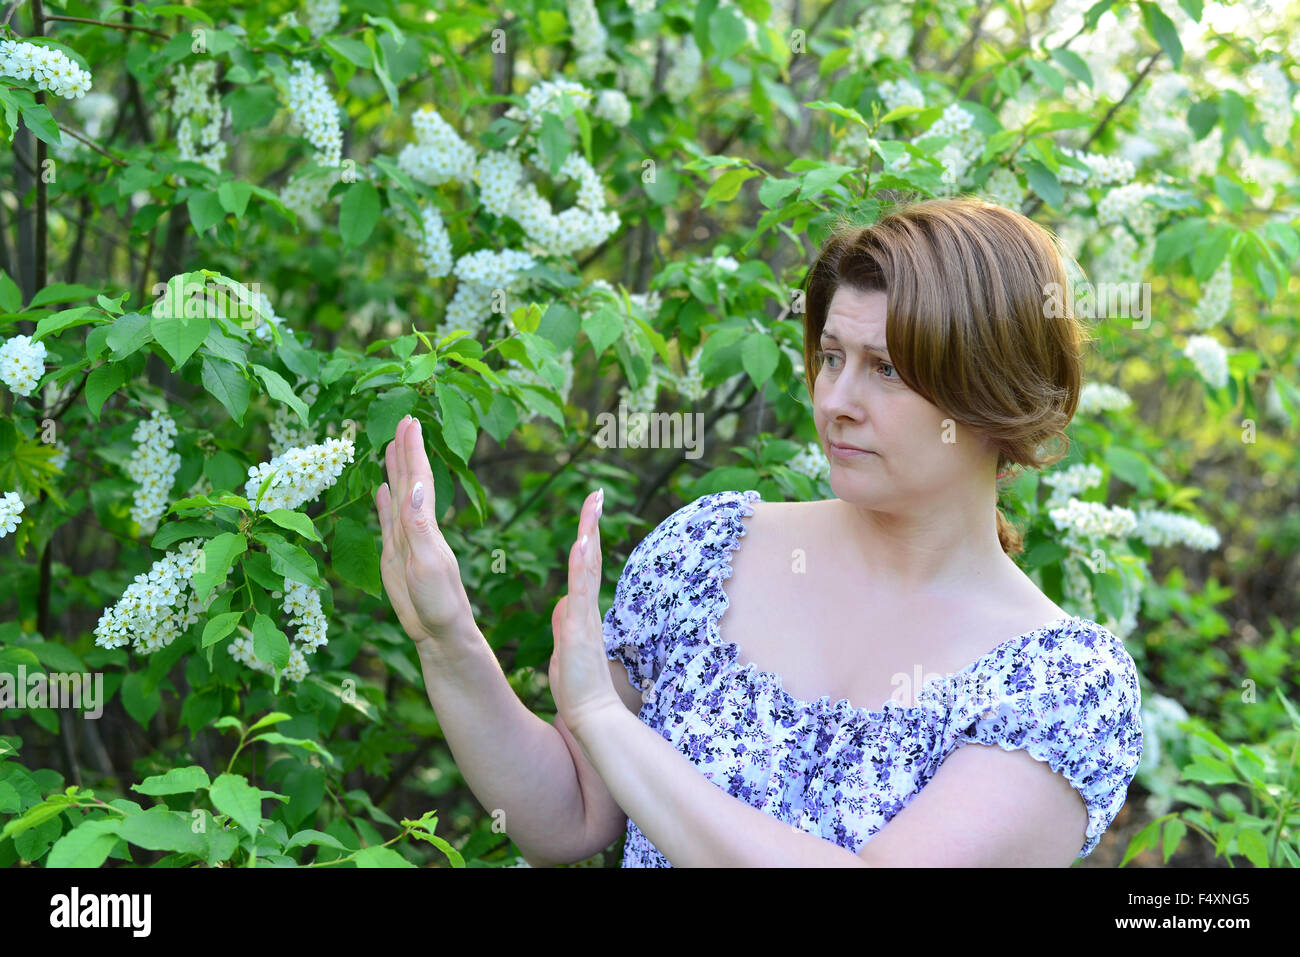 adult woman with allergic diseases removed from wild cherry blossoms Stock Photo